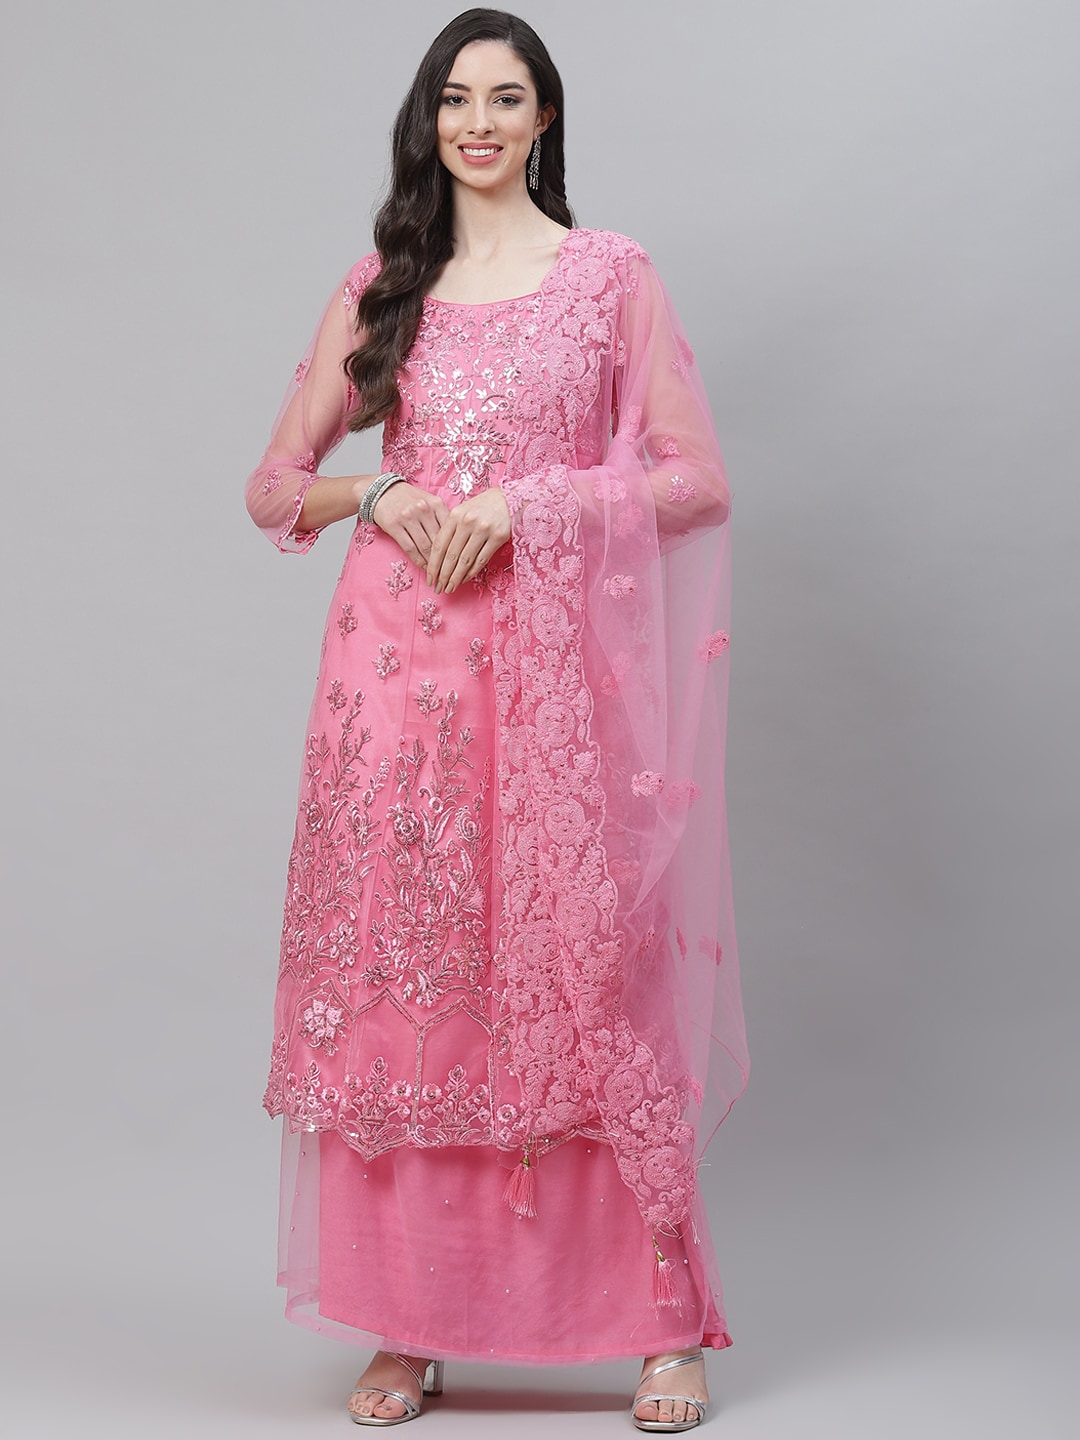 Readiprint Fashions Pink Embroidered Unstitched Dress Material